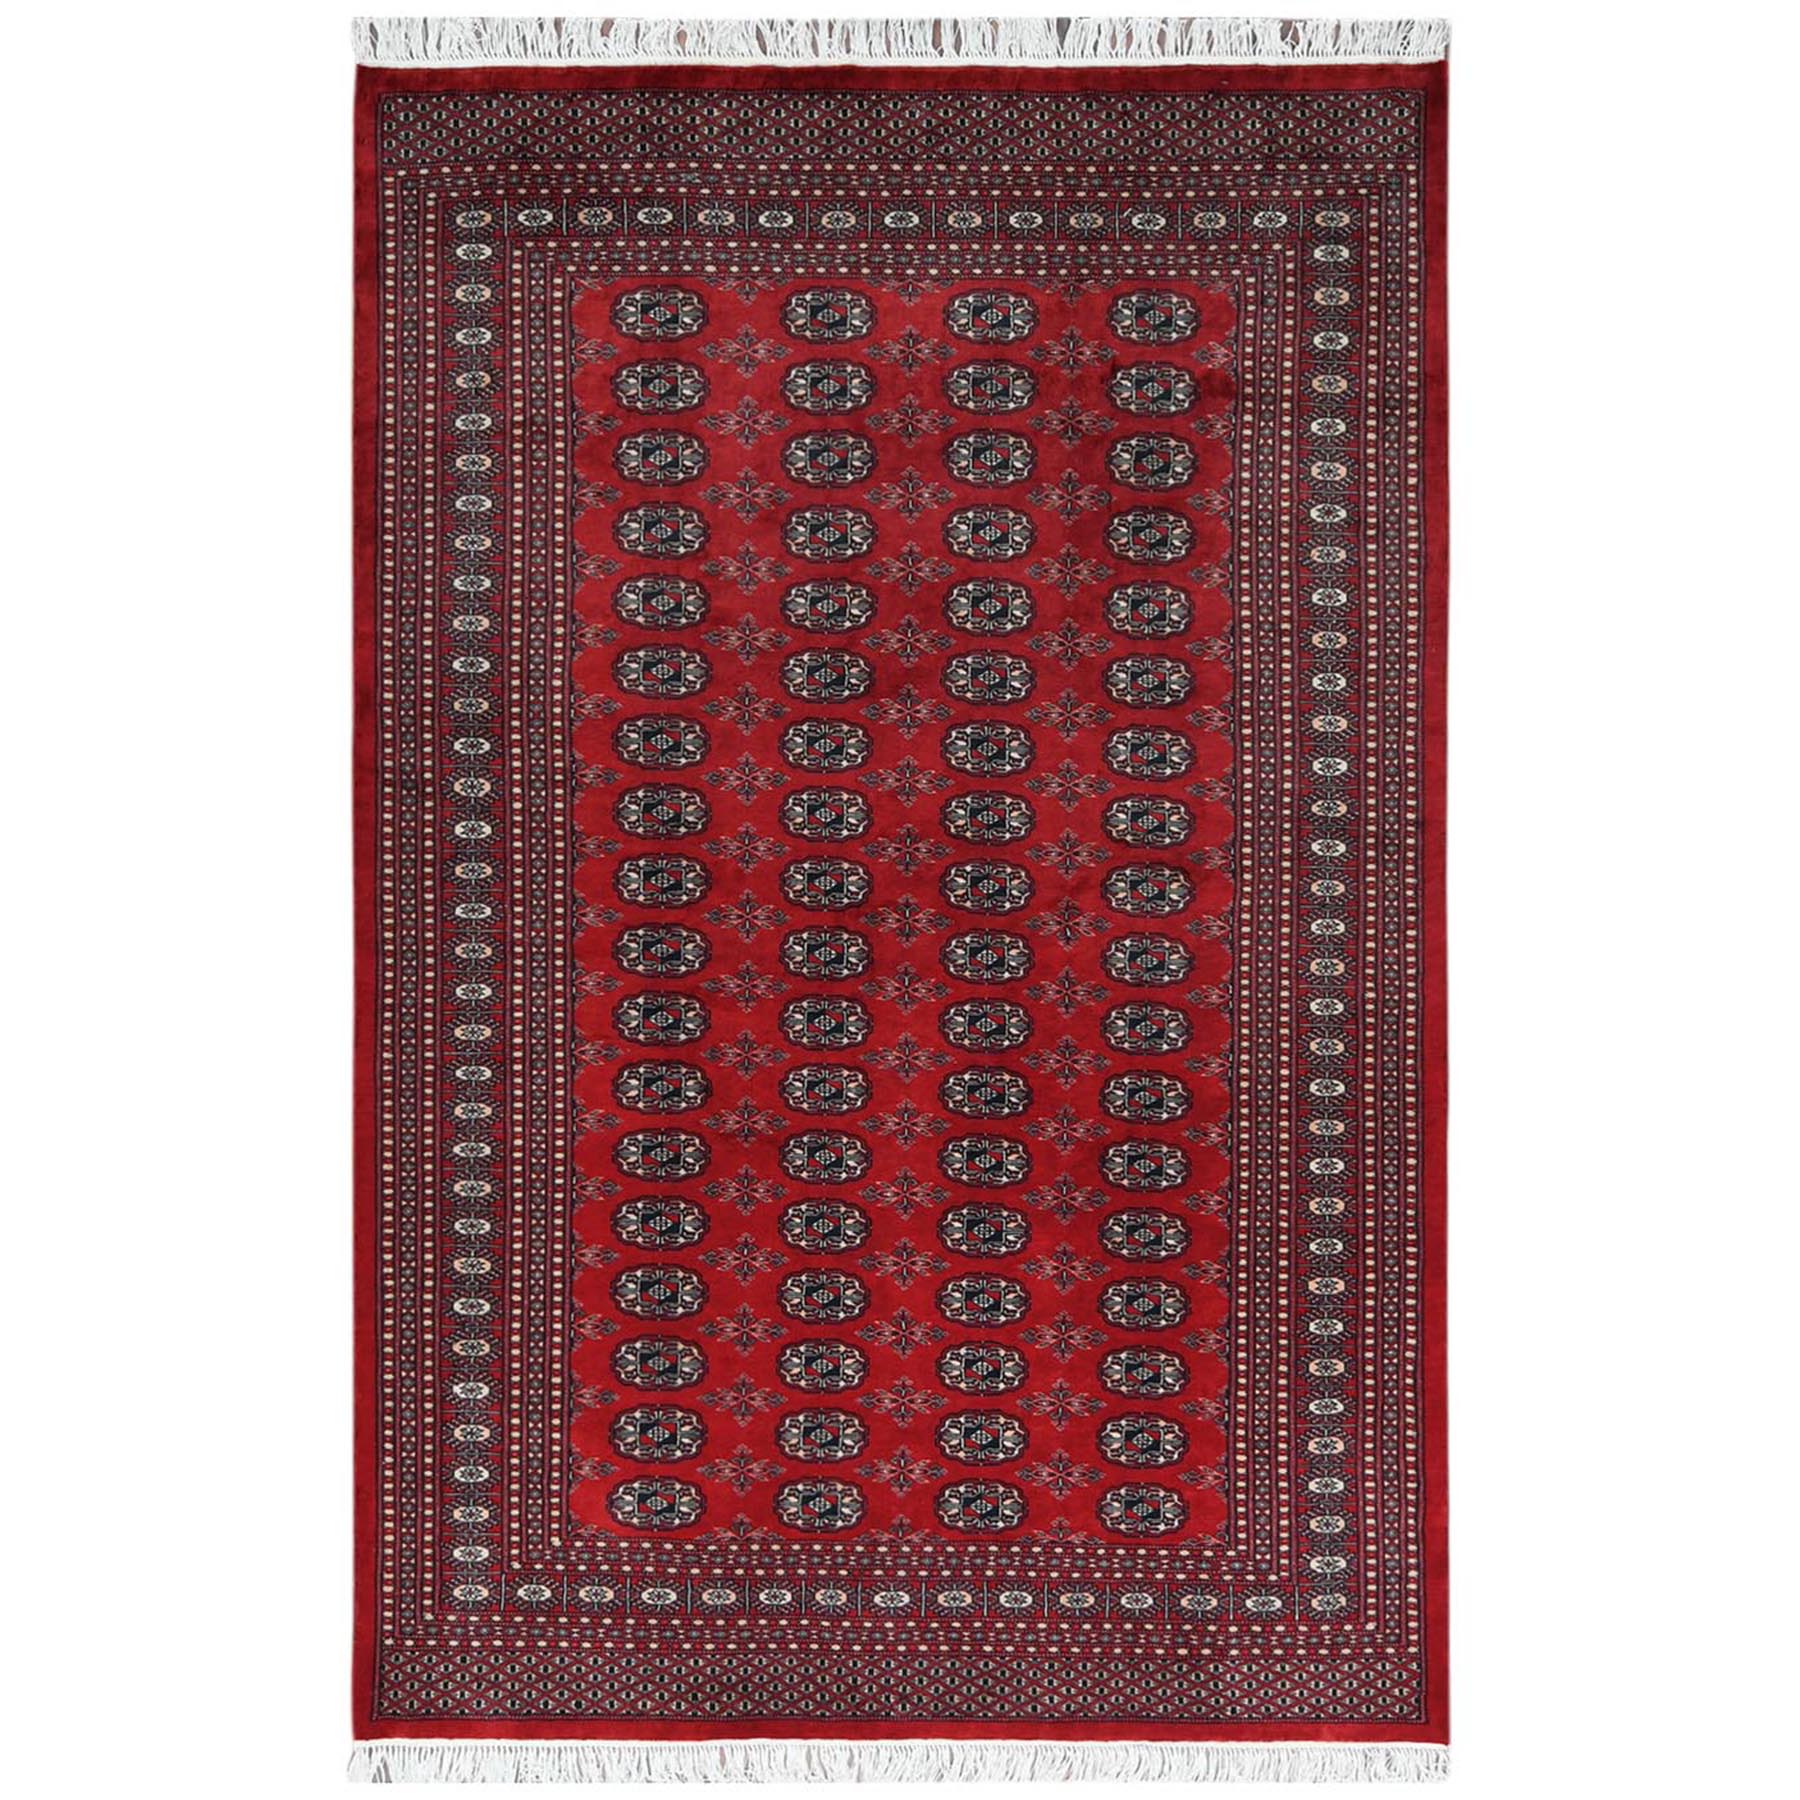 Nomadic And Village Collection Hand Knotted Red Rug No: 1122762